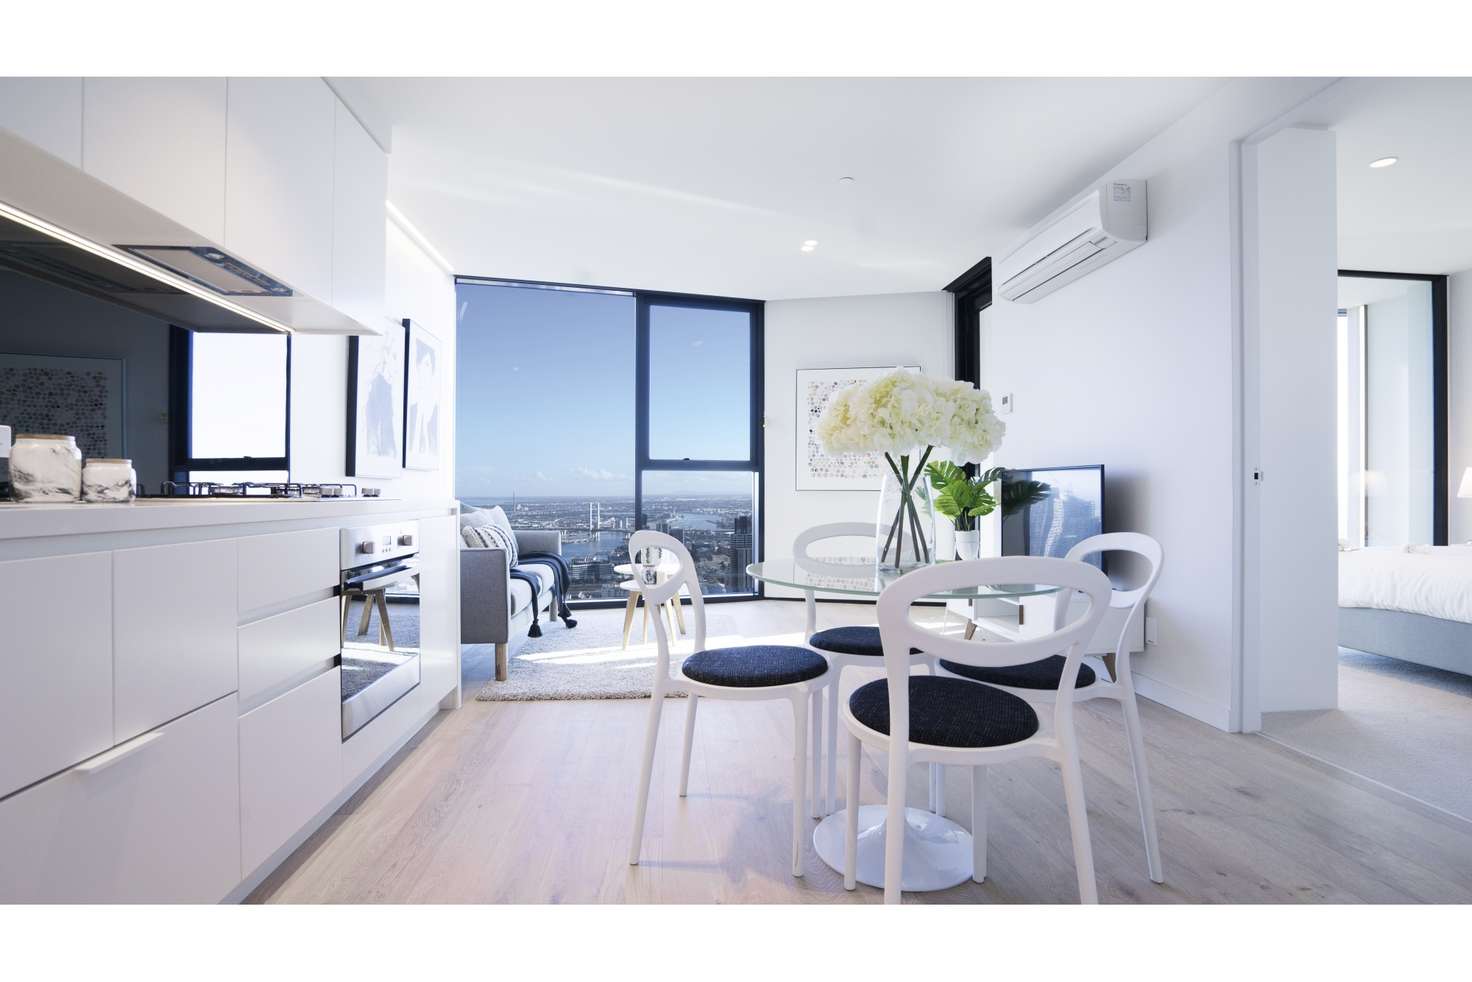 Main view of Homely apartment listing, 5508/442 Elizabeth Street, Melbourne VIC 3000